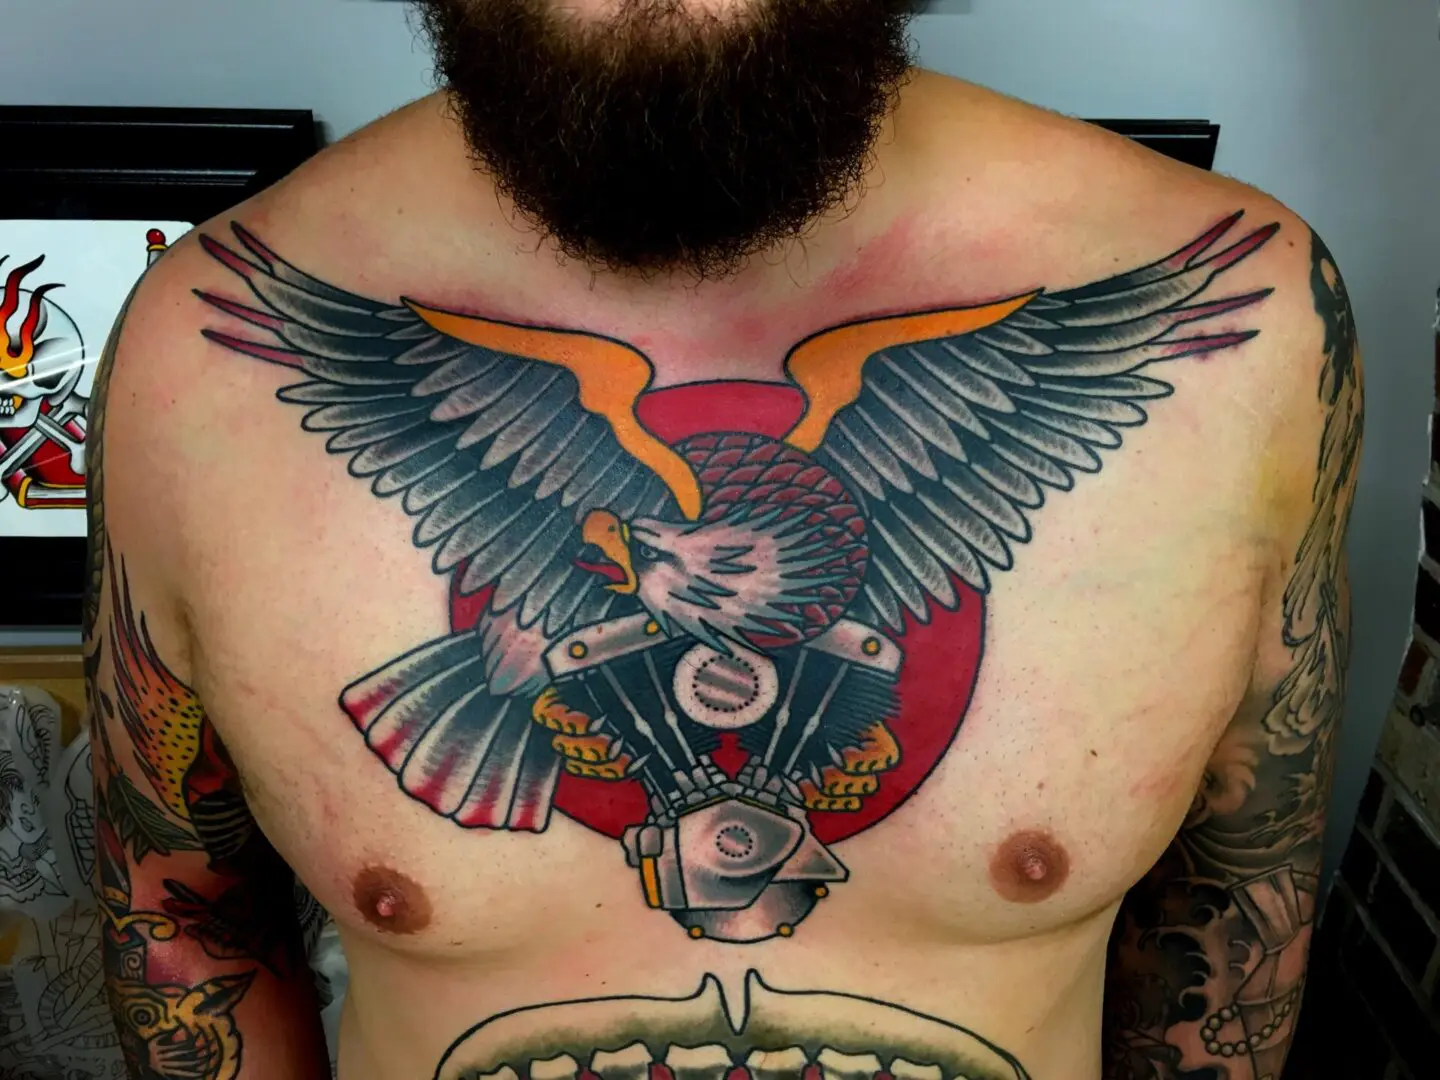 A man with a beard and tattoos on his chest. Best American Traditional Tattoo Artist - Myke Chambers